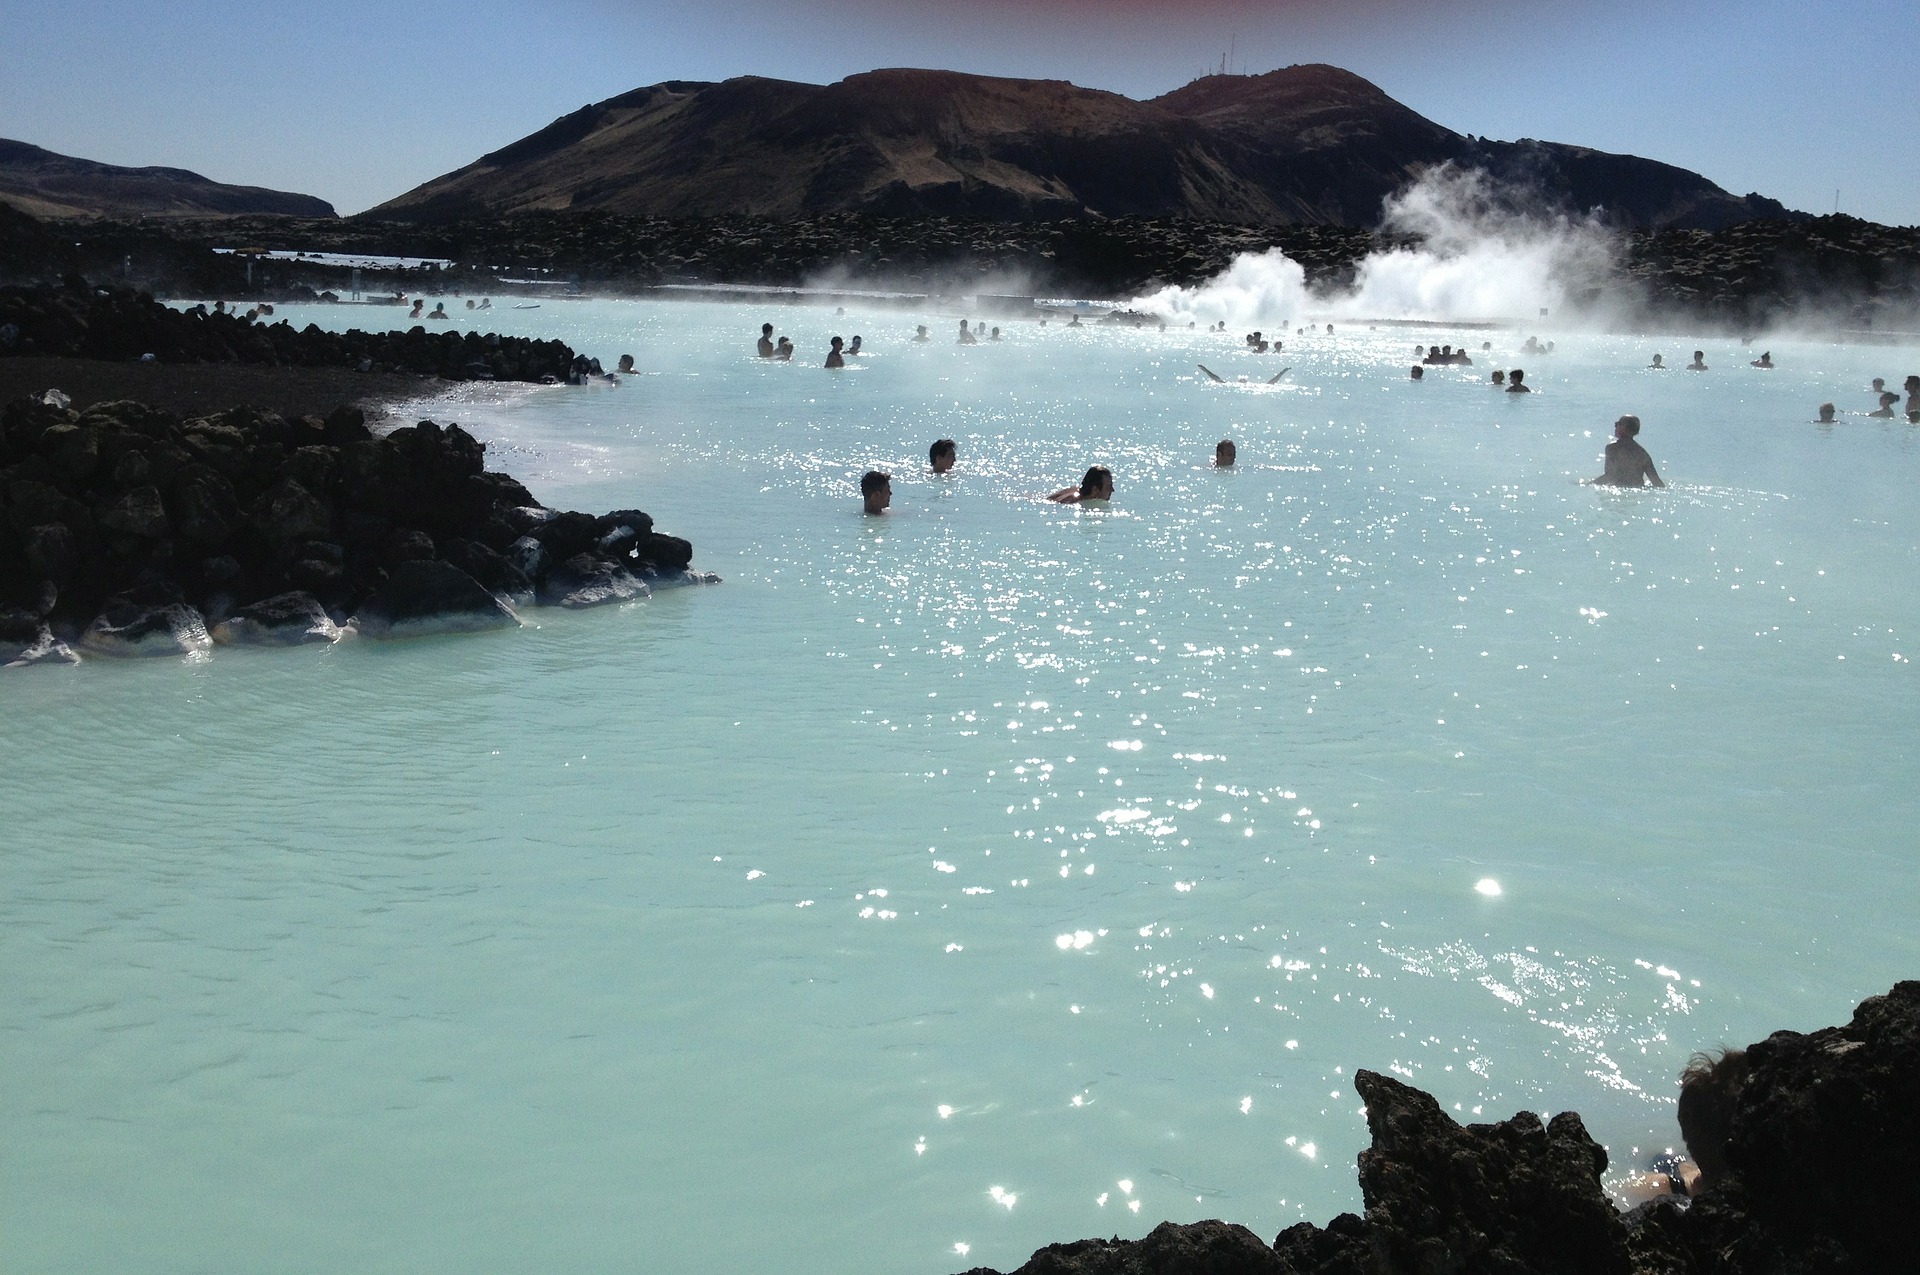 Blue Lagoon, the most famous spa in Iceland